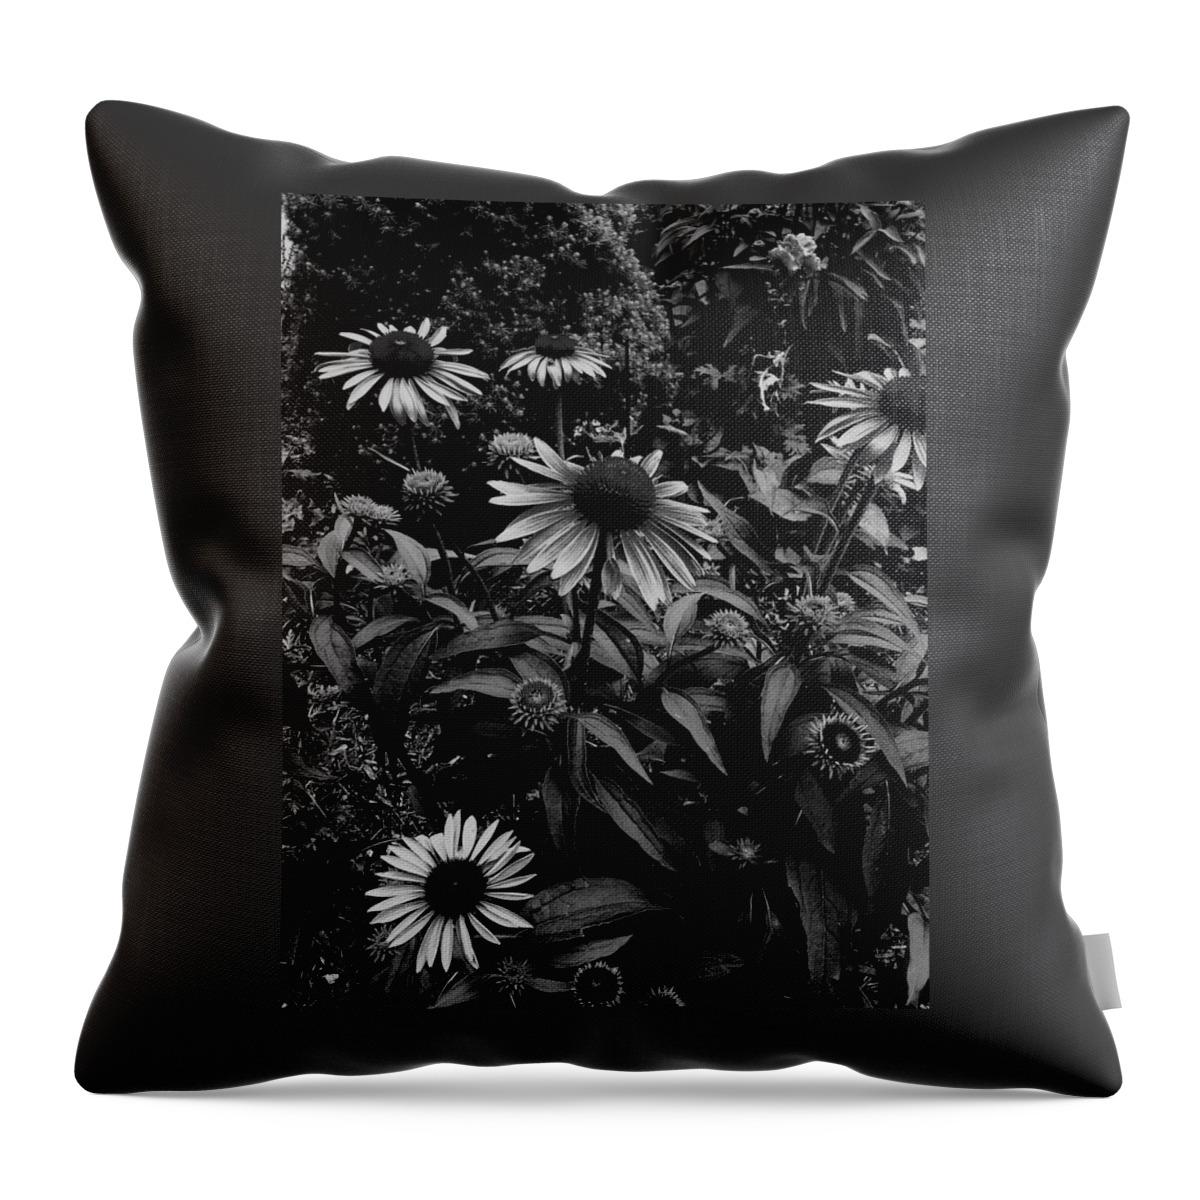 Black And White Photography Throw Pillow featuring the photograph Prosperity by Frank J Casella